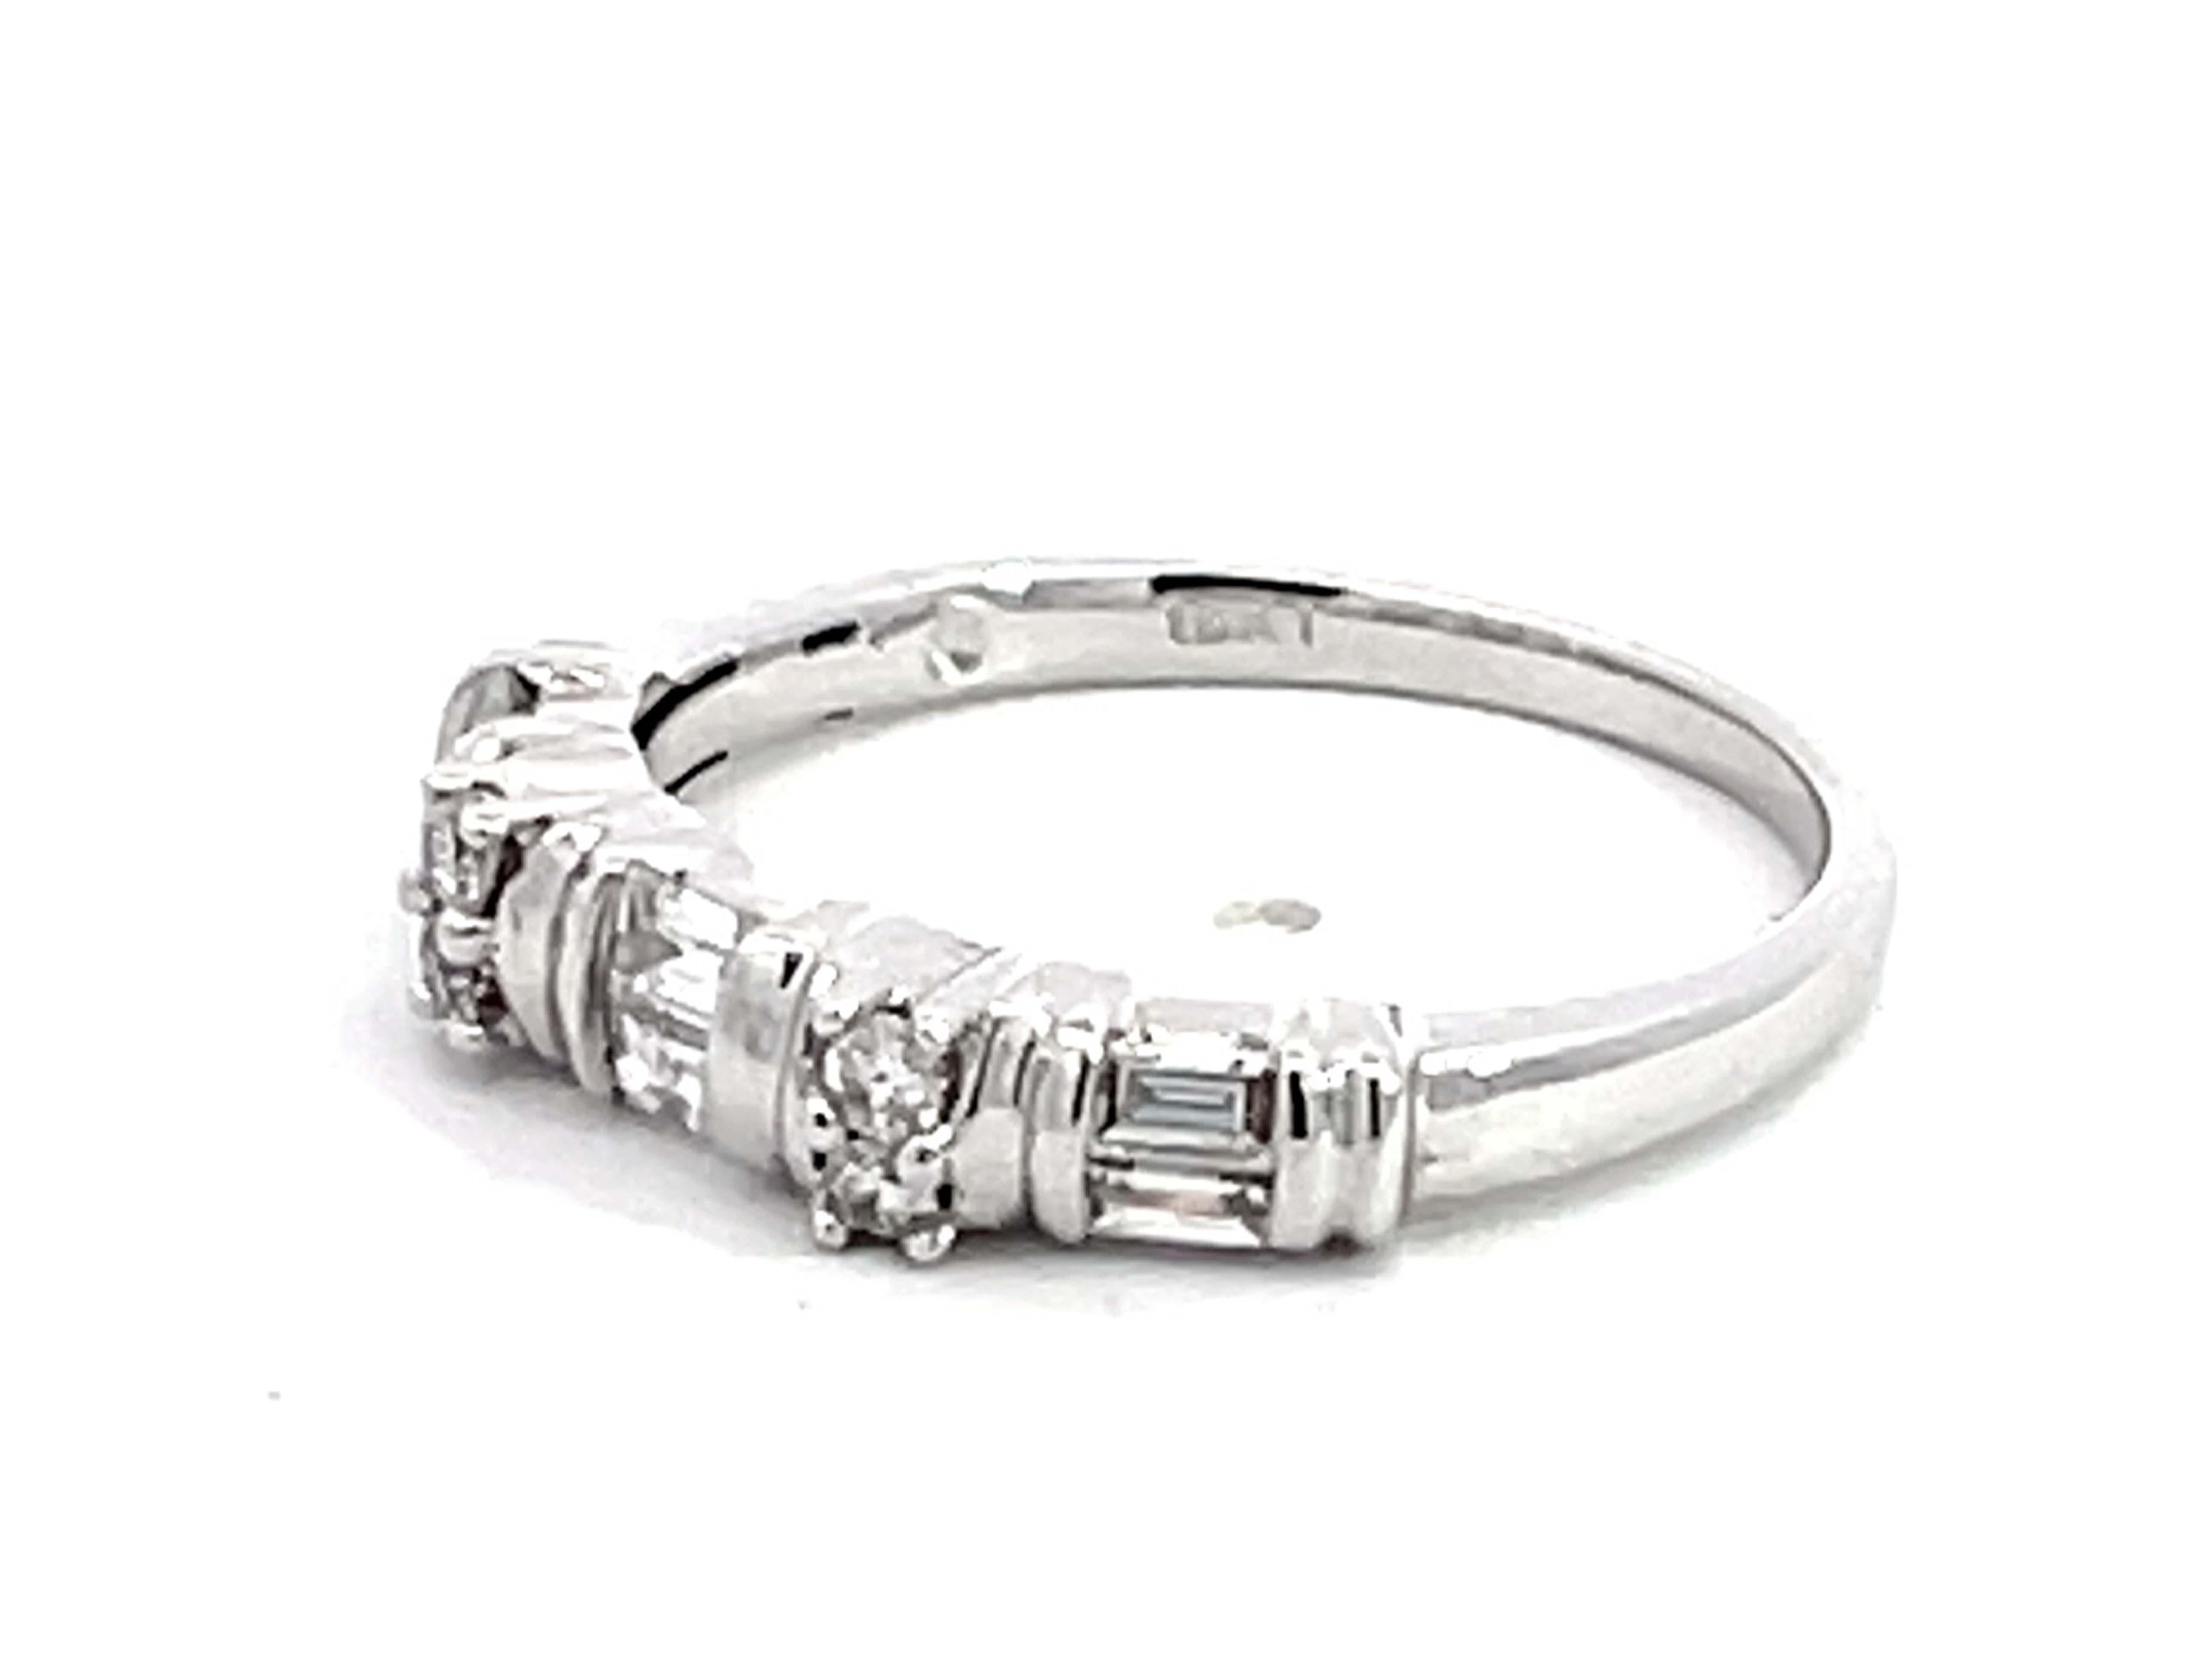 Baguette and Brilliant Cut Diamond Band Ring Solid 18k White Gold In Excellent Condition For Sale In Honolulu, HI